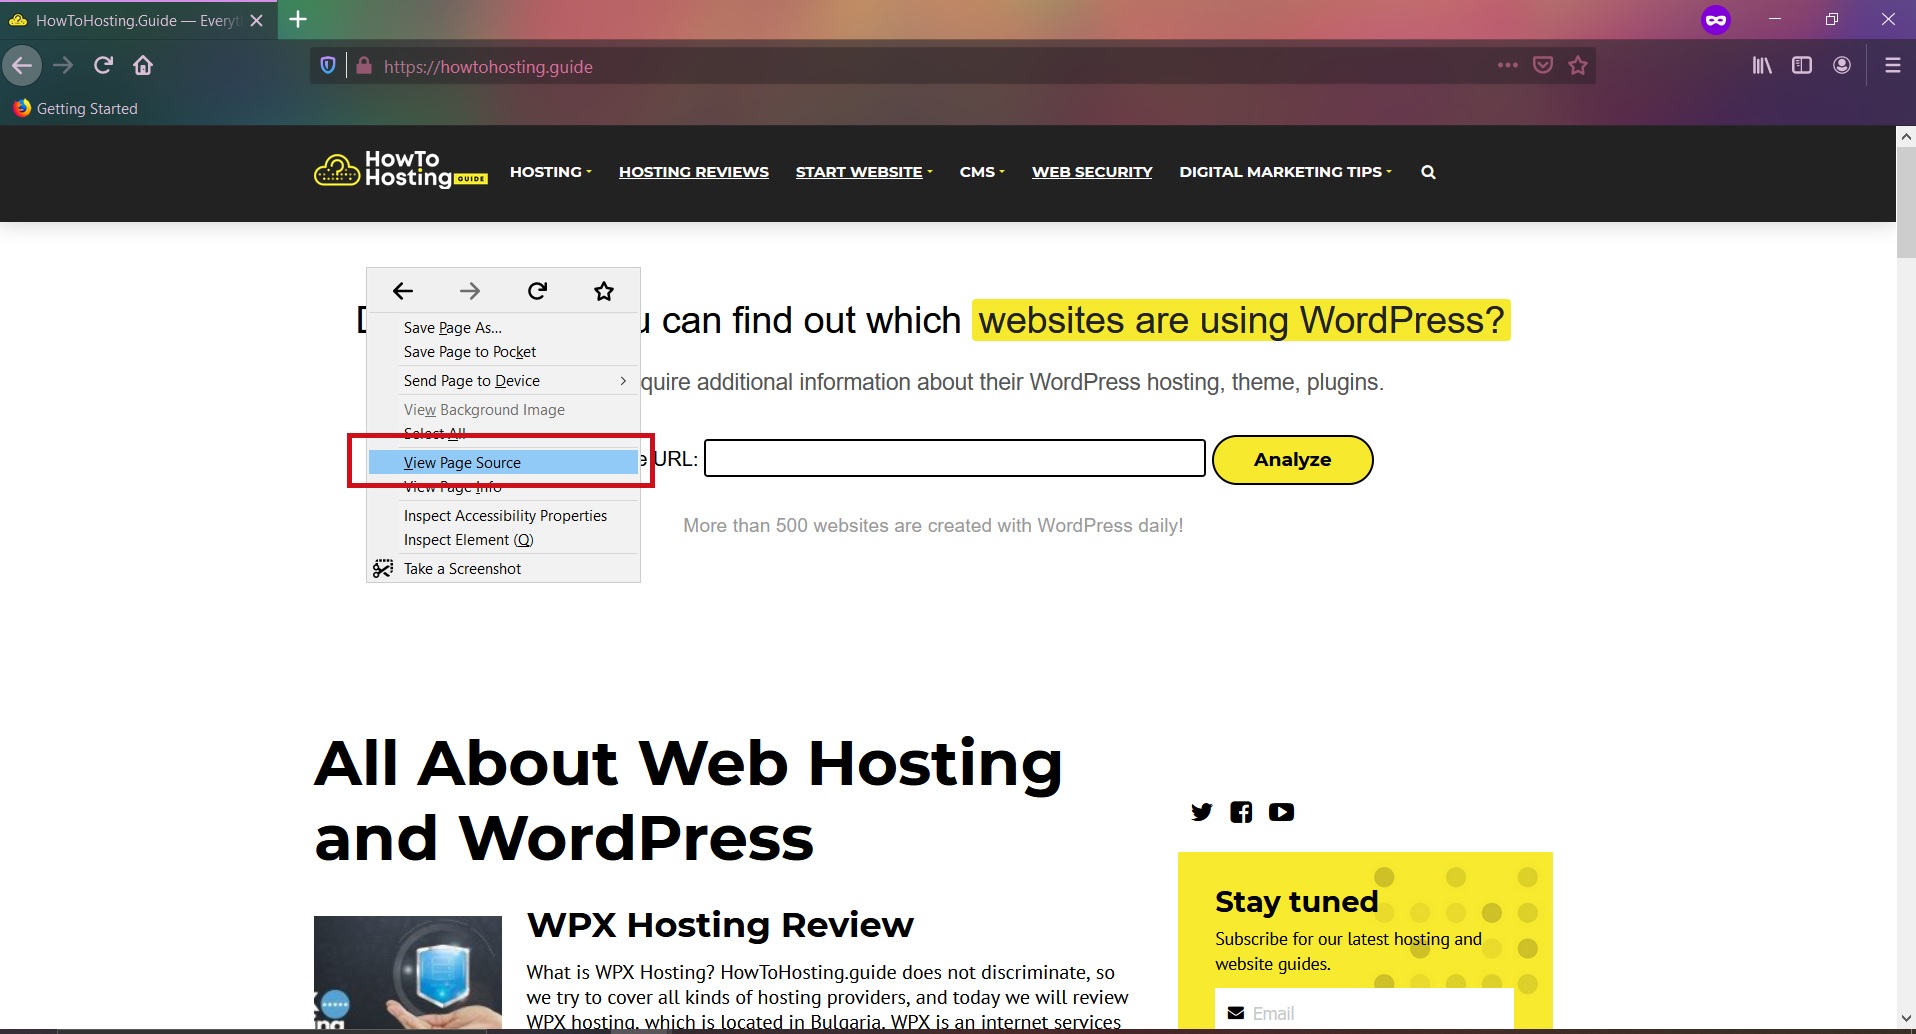 view-page-source-site-howtohosting-guide